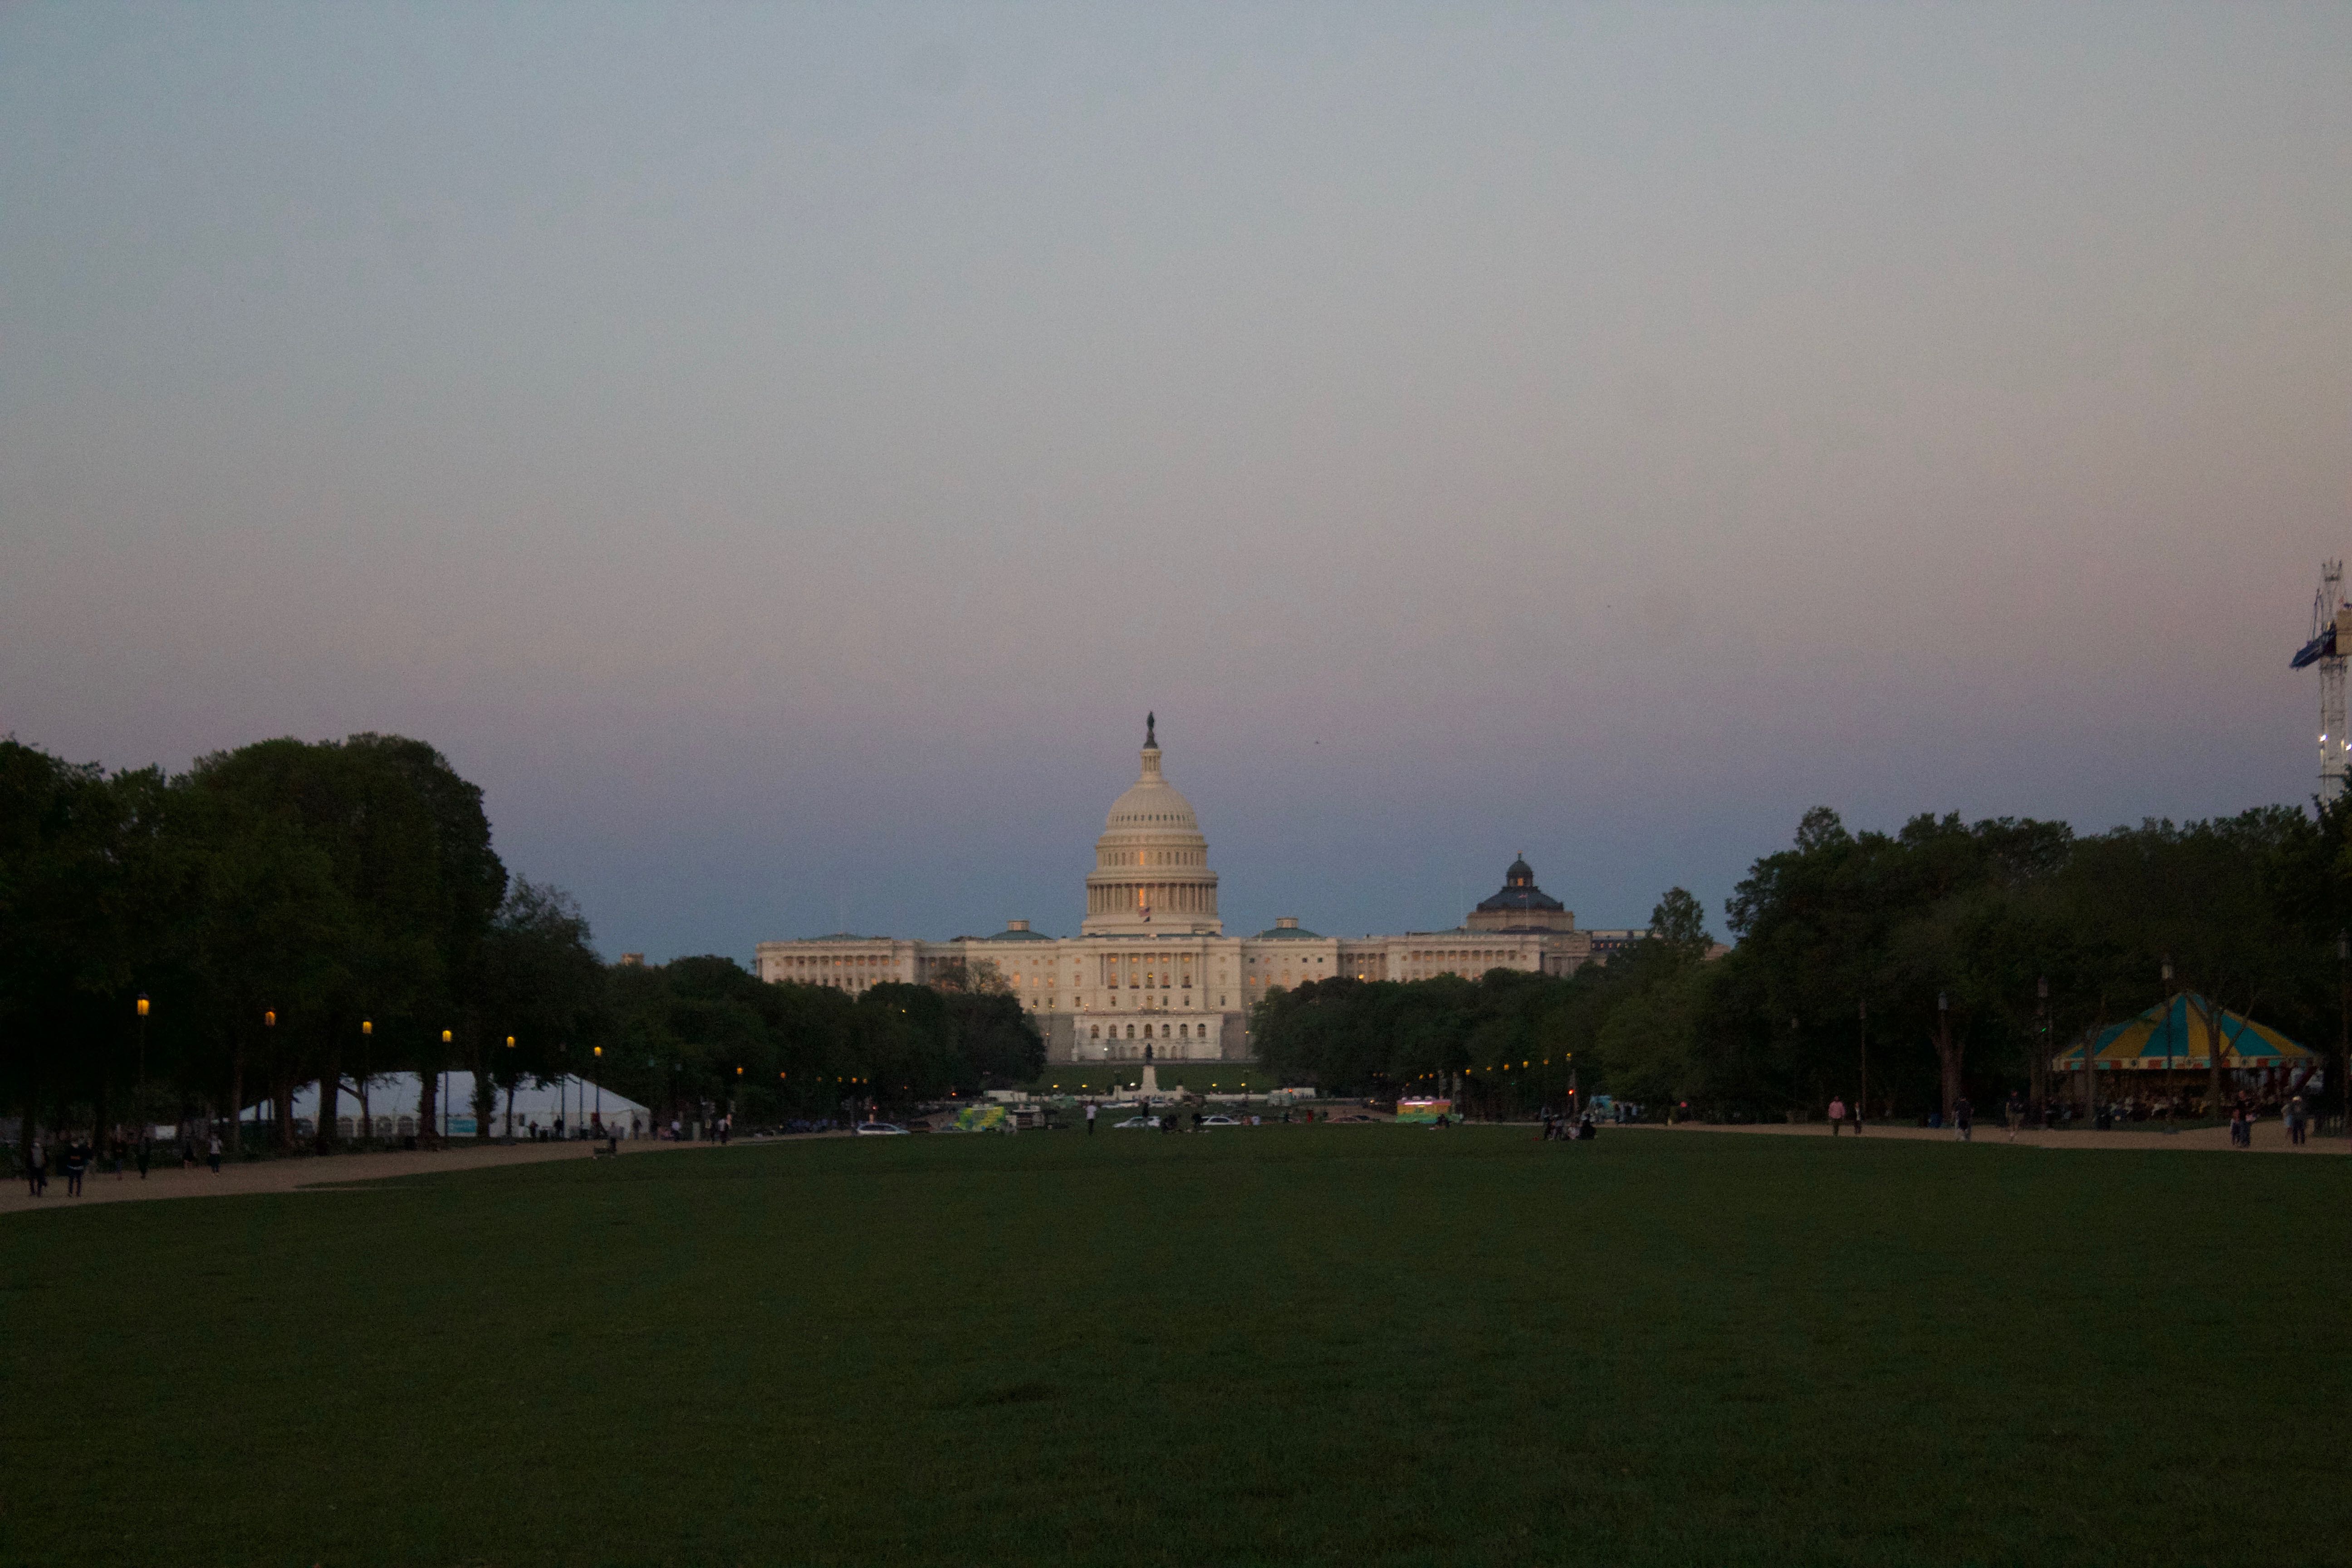 The Capitol Building, from the lawn.